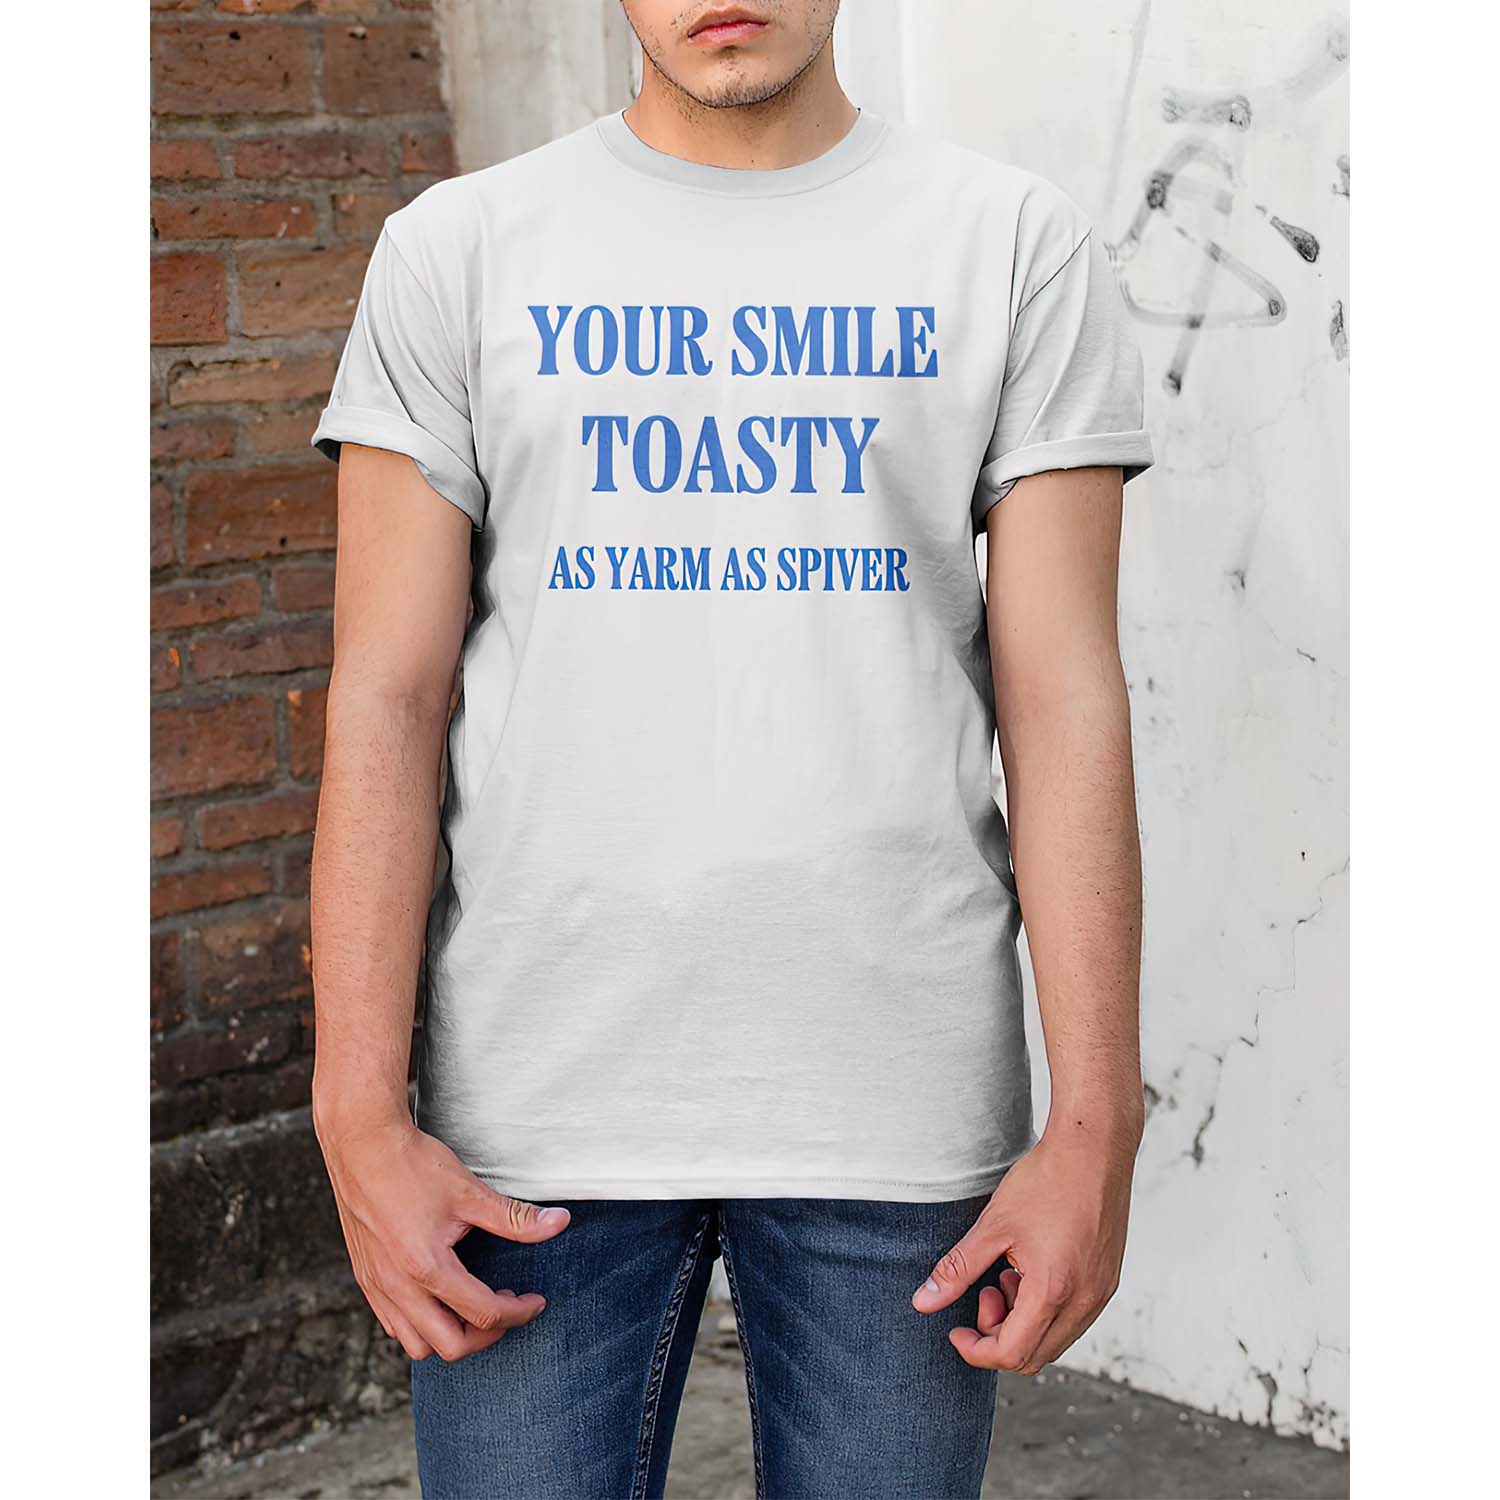 Your Smile Toasty As Yarm As Spiver Shirt